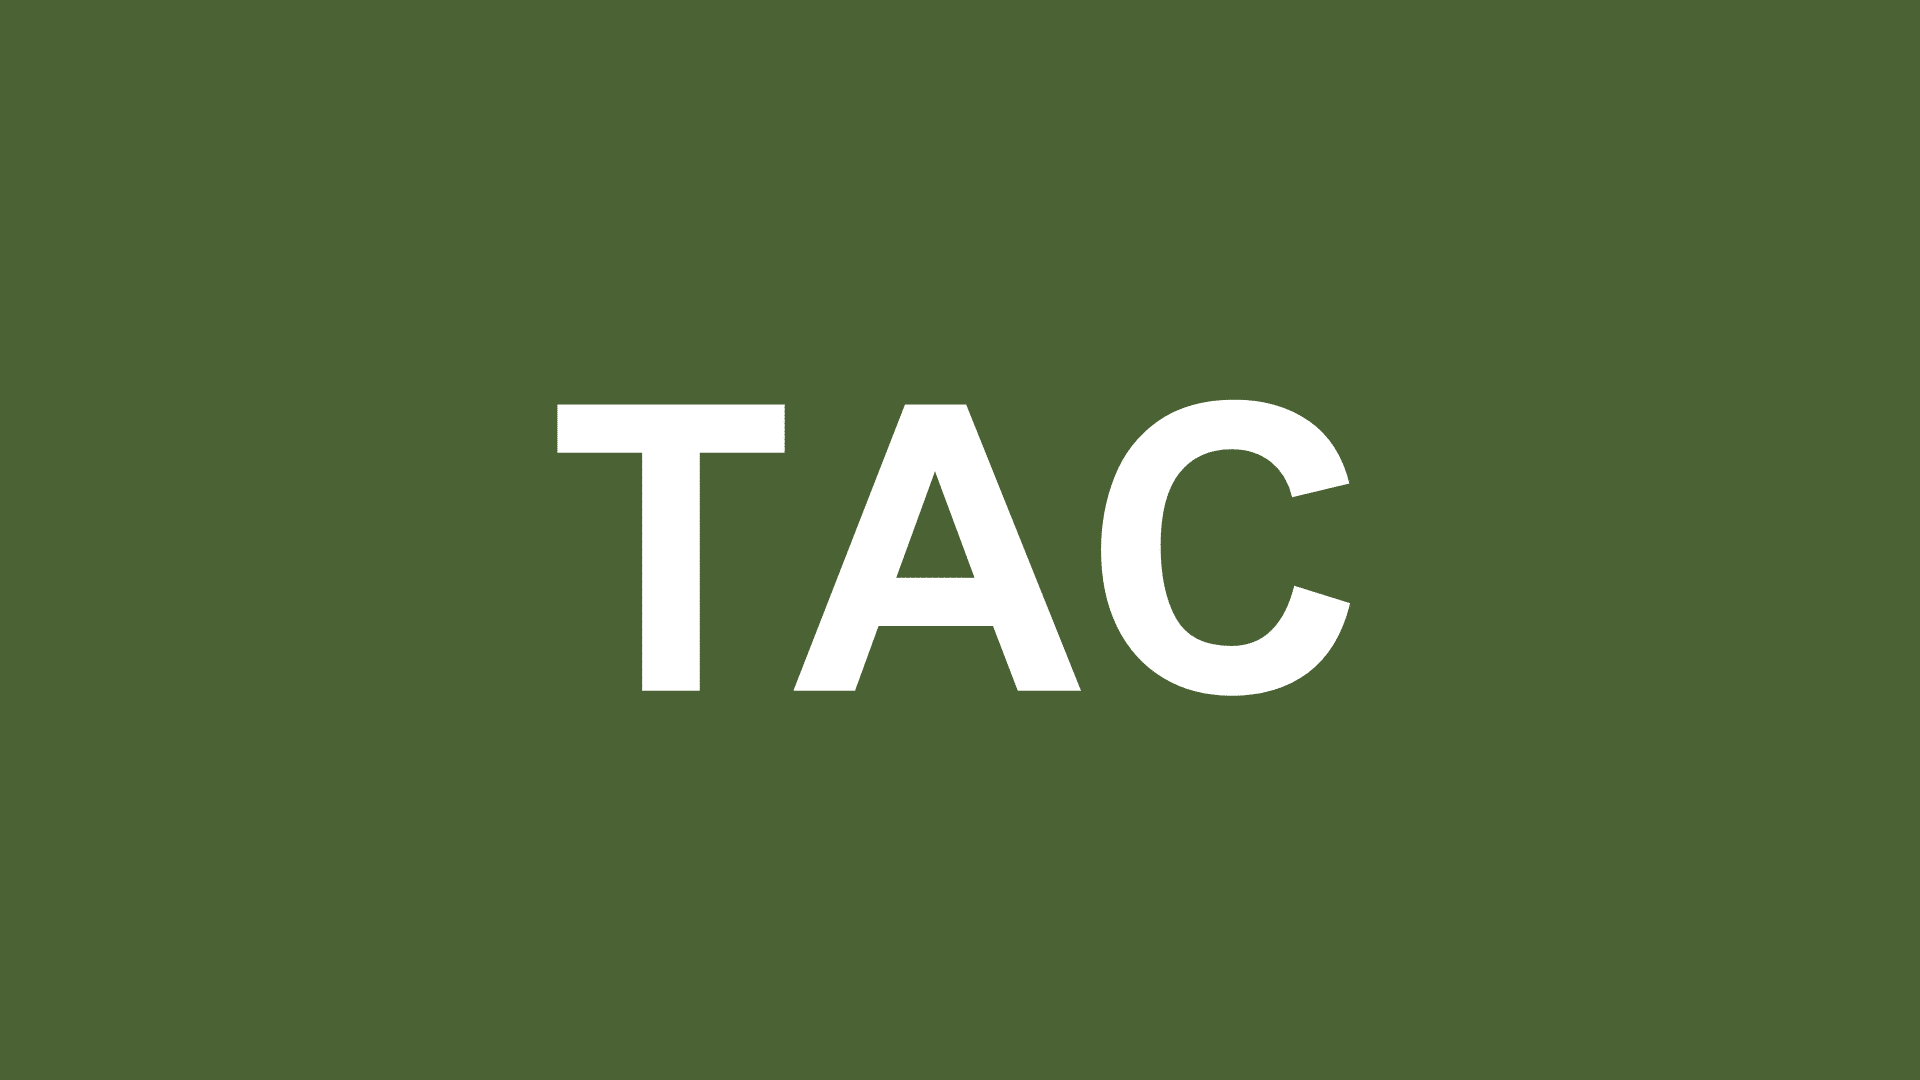 Text that reads "TAC"